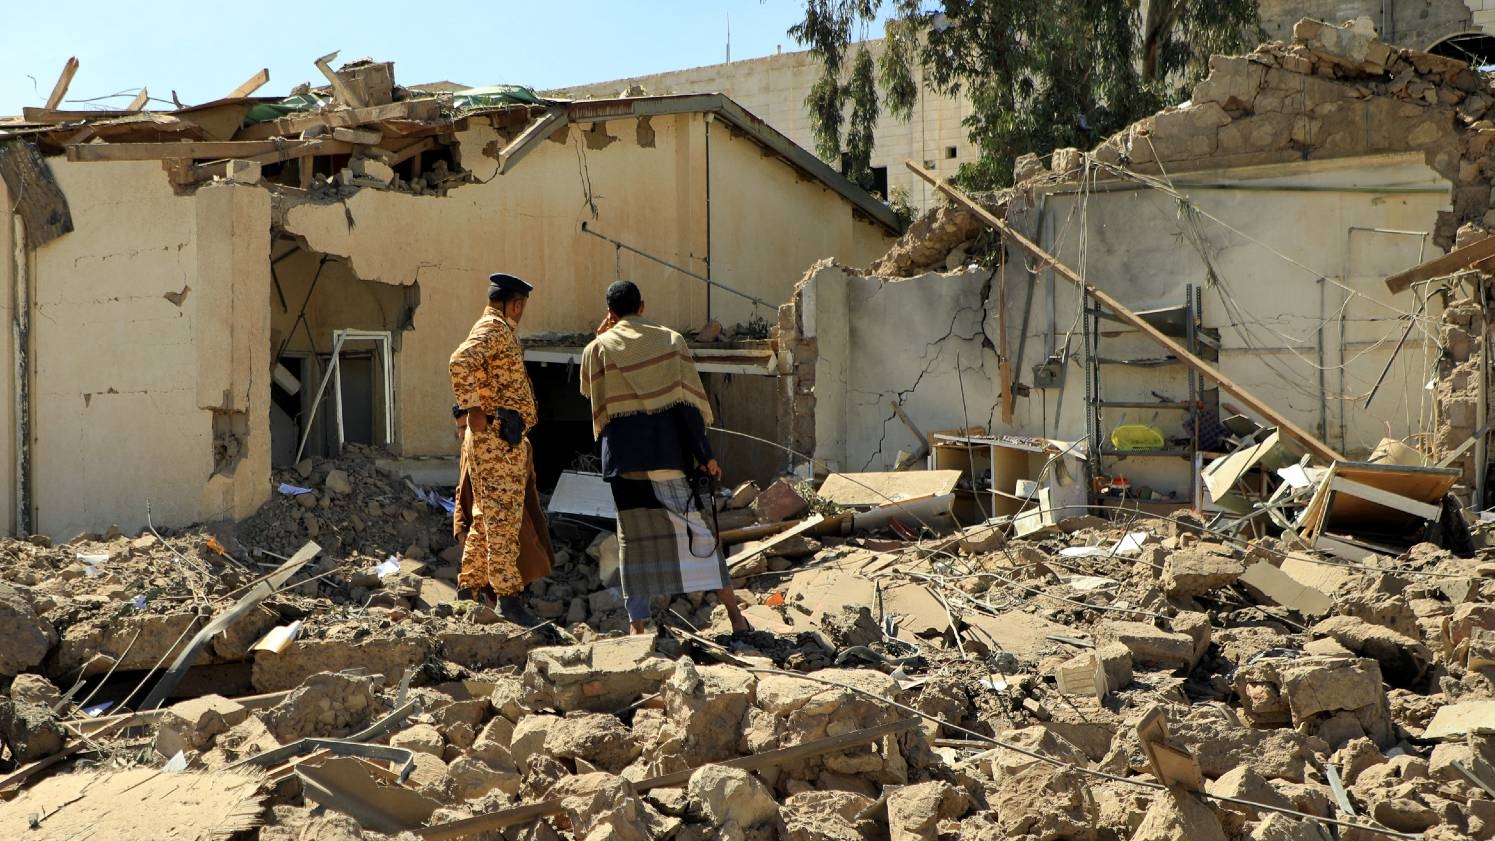 Yemenis inspect the damage in the vicinity of the telecommunication ministry following Saudi-led coalition air strikes targeting the capital of Sanaa, on 14 February 2022.